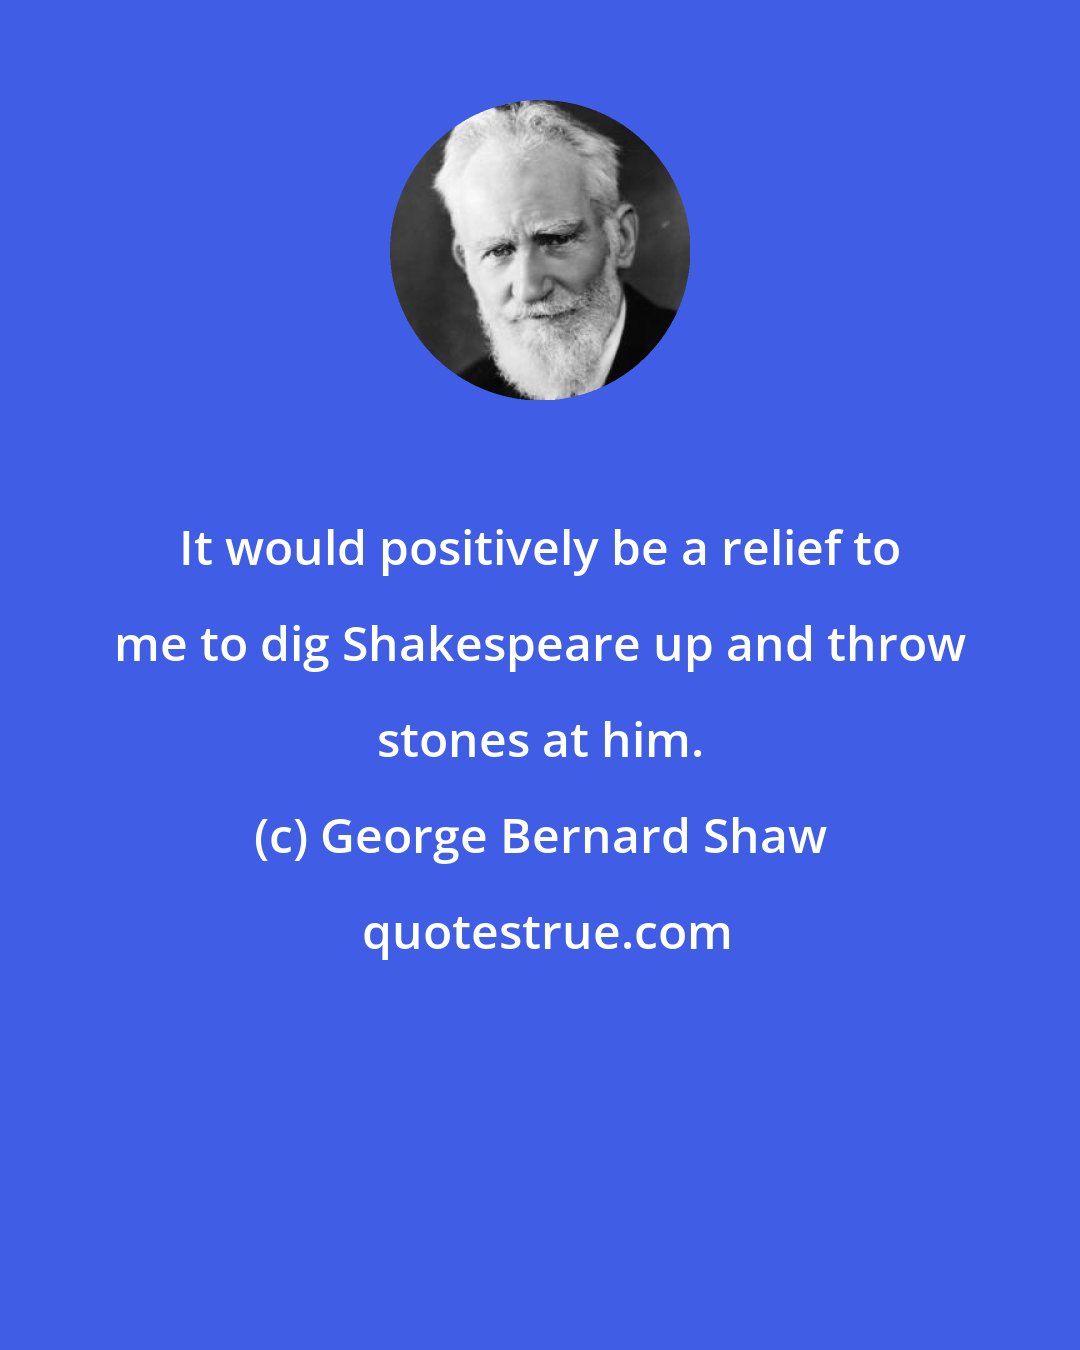 George Bernard Shaw: It would positively be a relief to me to dig Shakespeare up and throw stones at him.